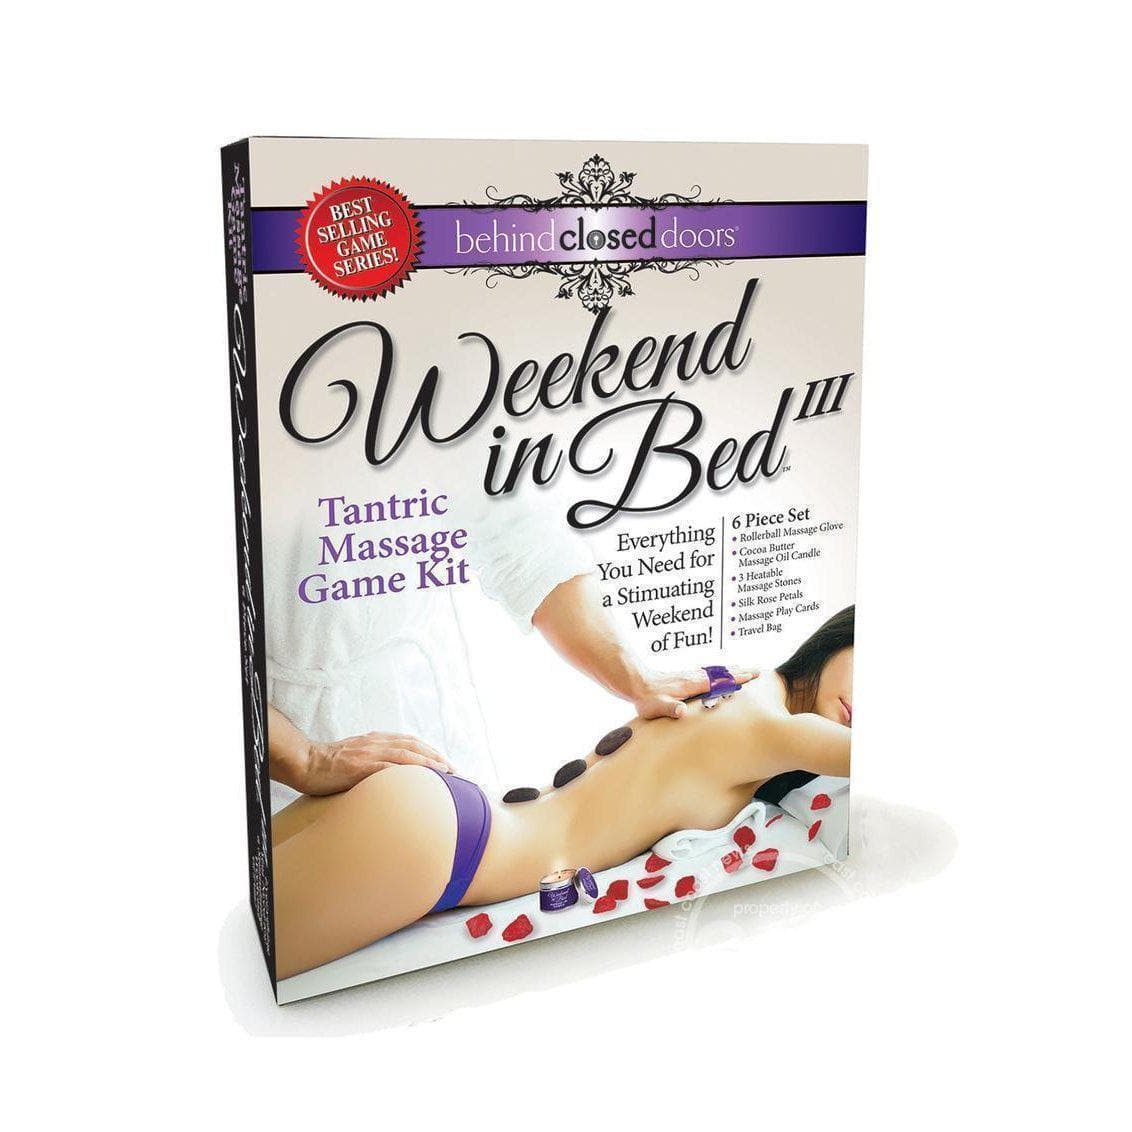 Behind Closed Doors Weekend In Bed III Tantric Massage Game Kit - Romantic Blessings